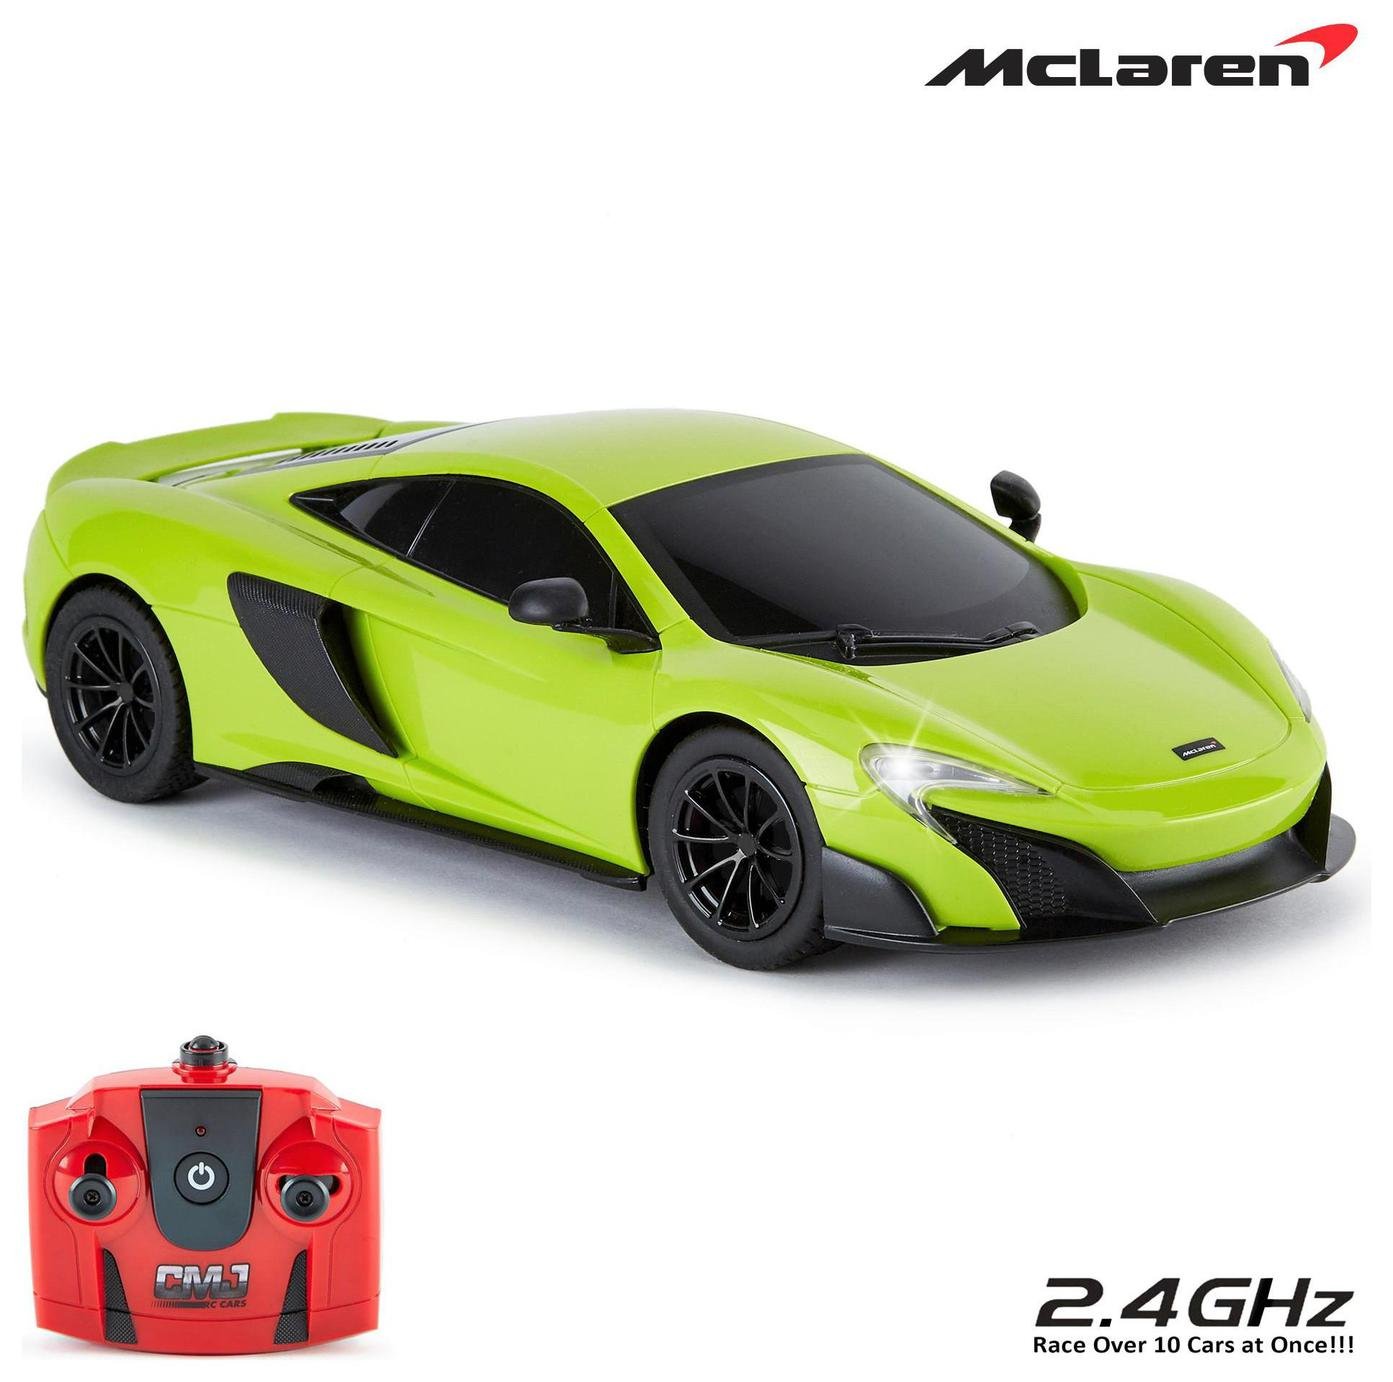 McLaren 1:24 Radio Controlled Sports Car review